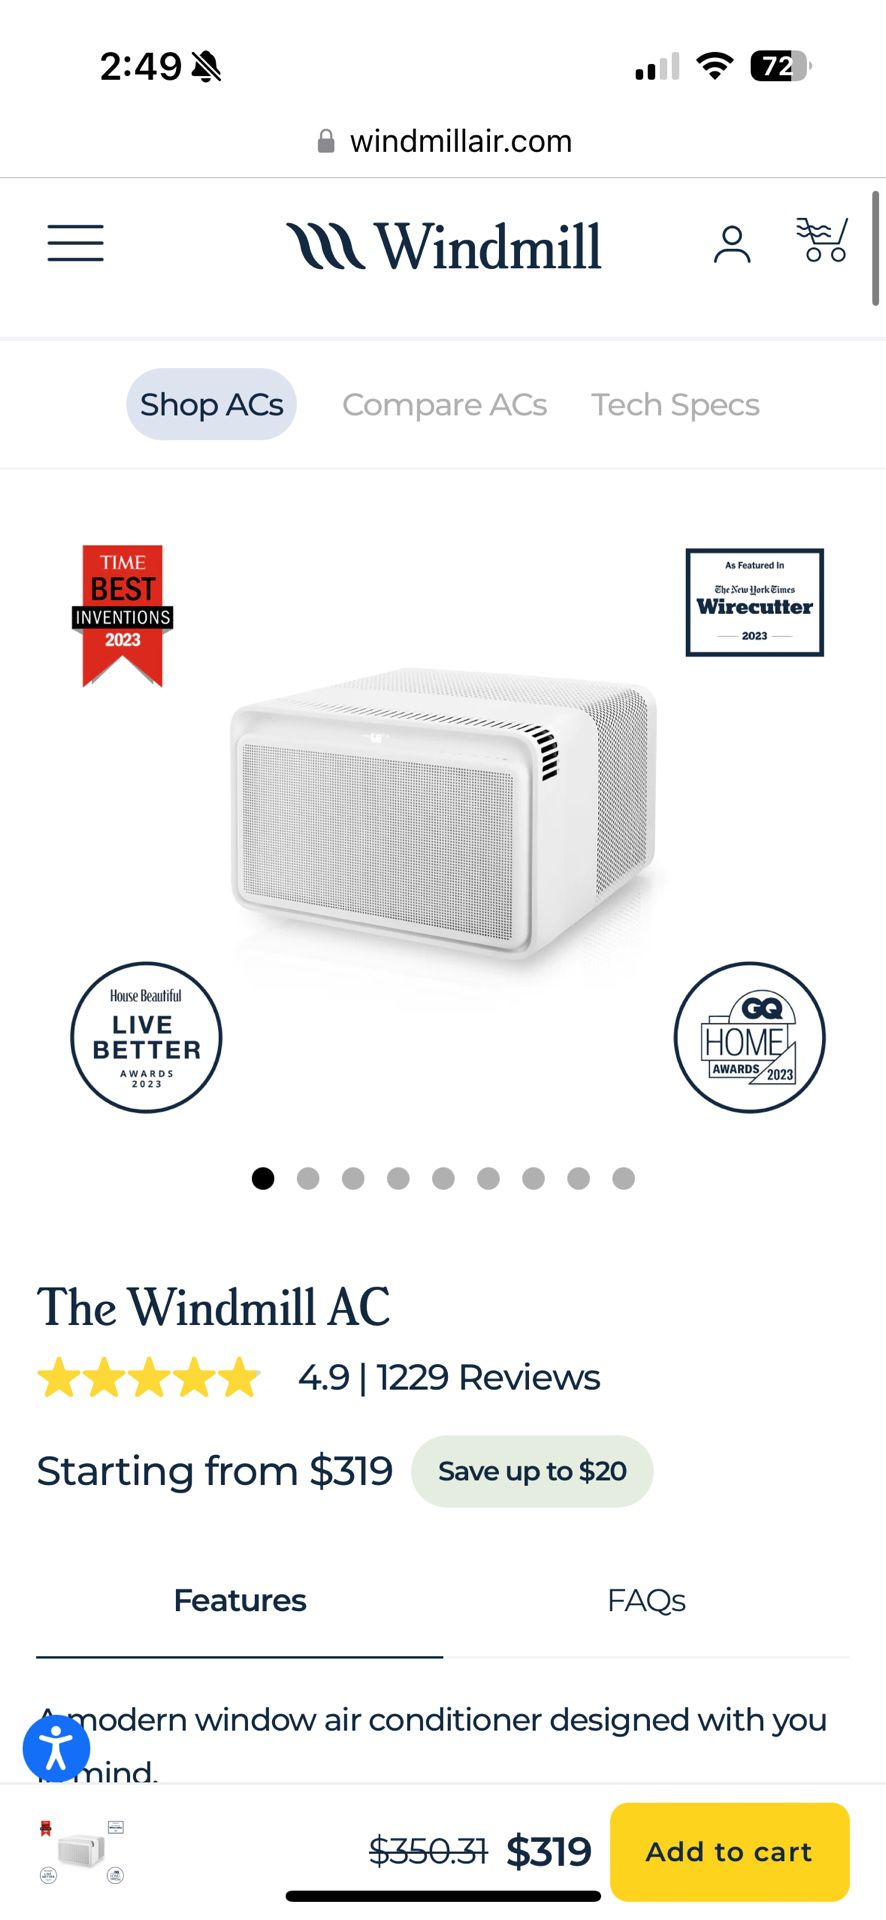 Windmill A/C Unit & Extra Carbon Filters 